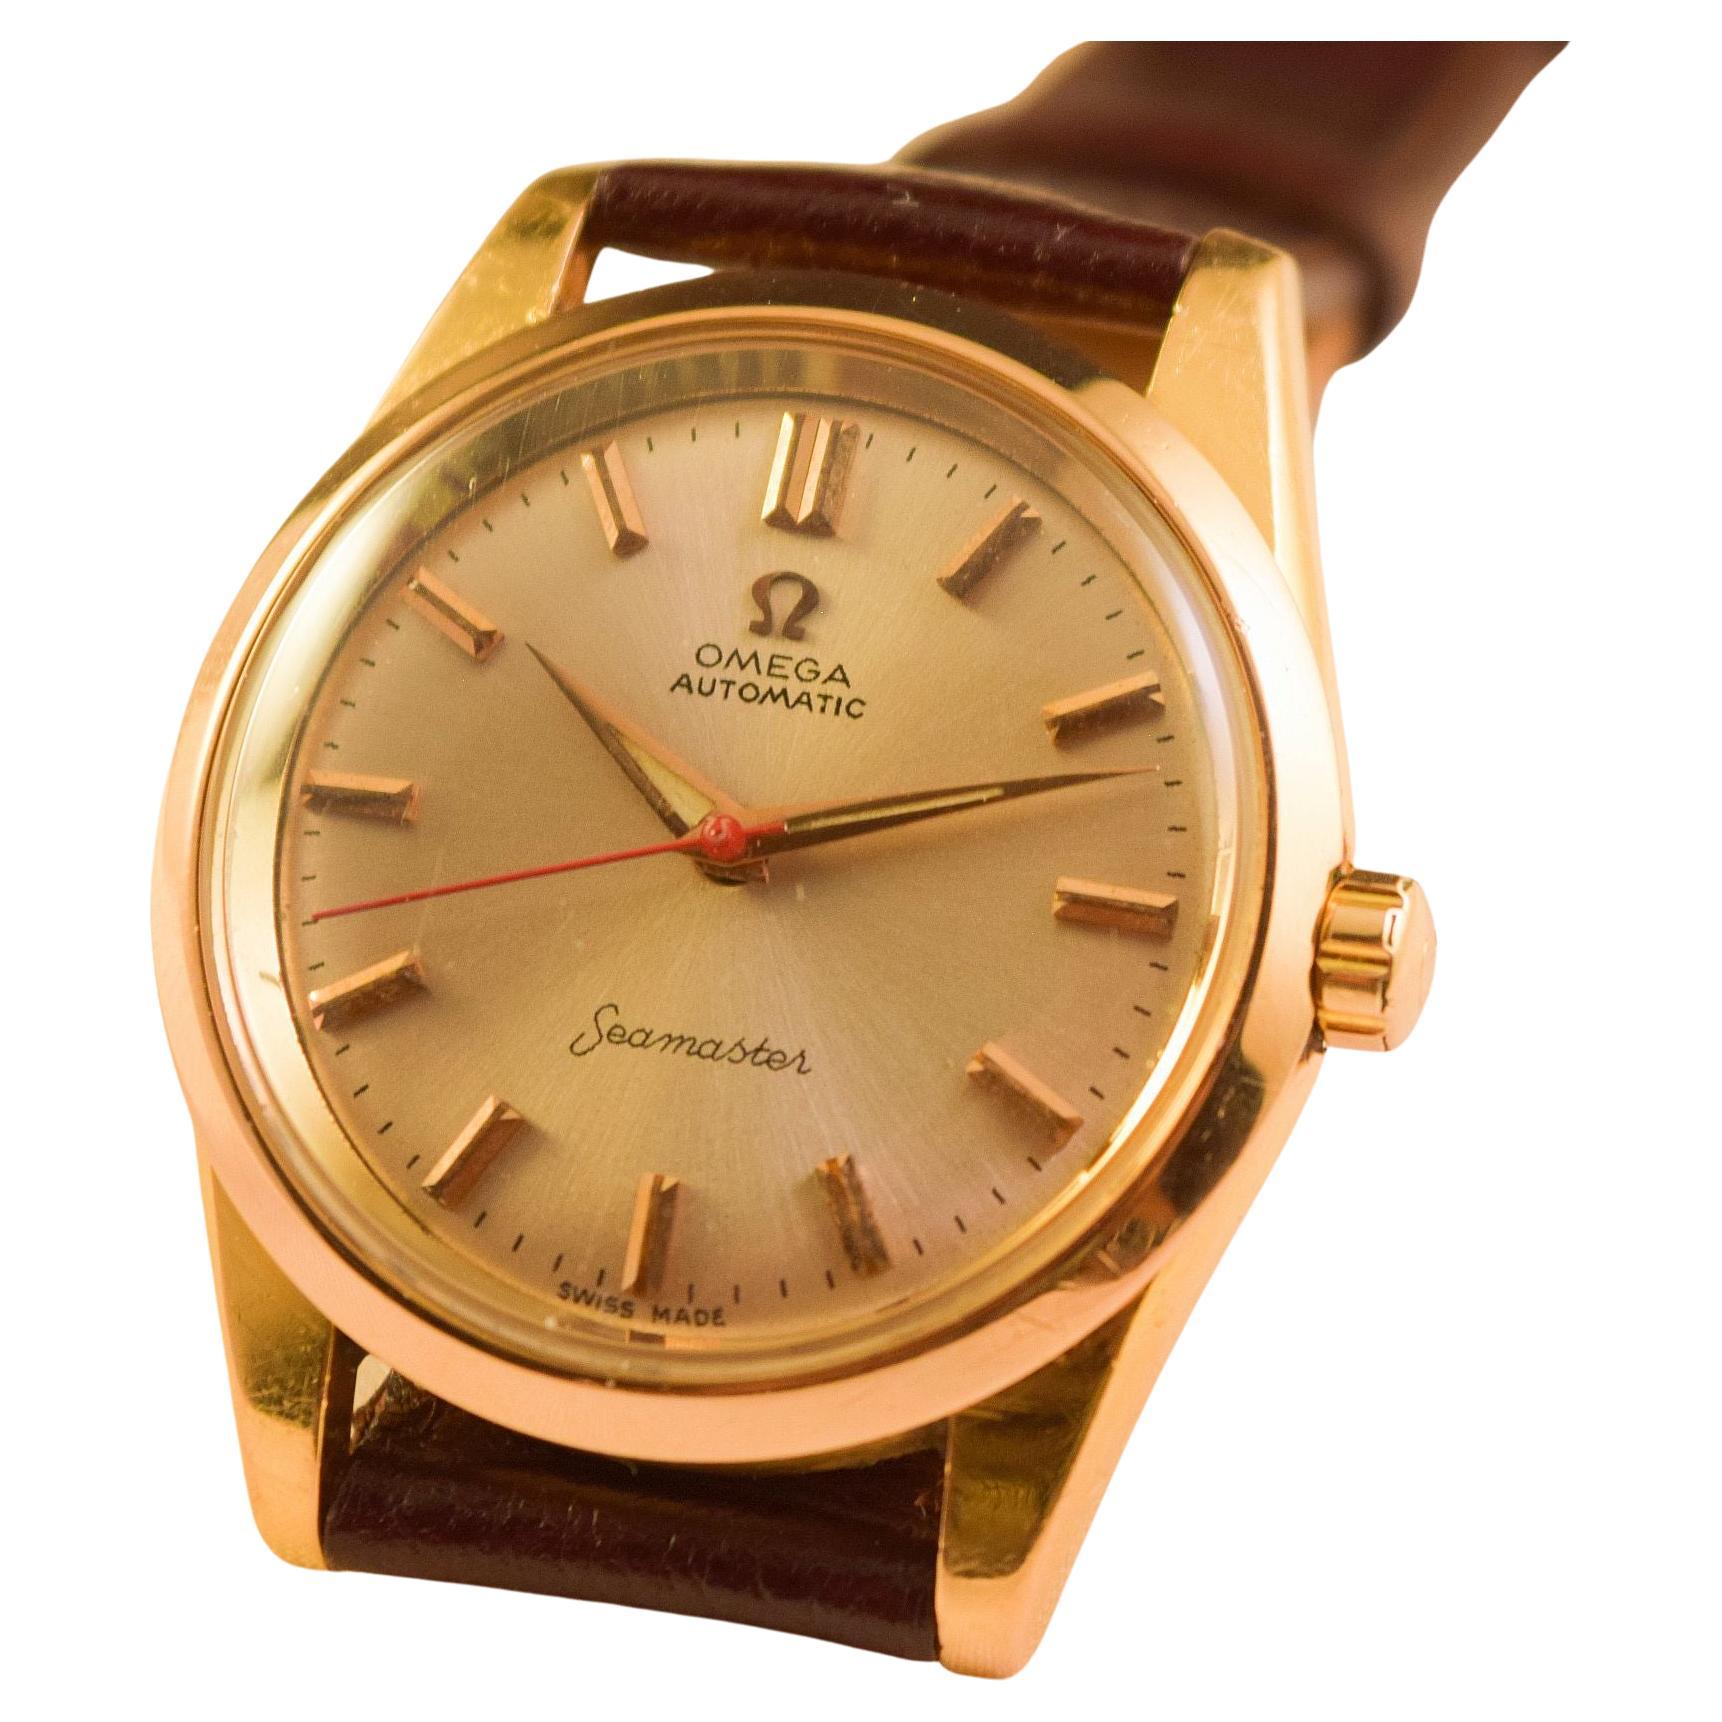 Omega Sea Master Automatic solid 18 k Pink gold
Rare attractive solid 18 K case

Dial is signed Omega Automatic Sea Master
Pink gold raised Omega Logo,raised Pink gold Markers-date
Pink gold and luminious hands with red center seconds.
Original